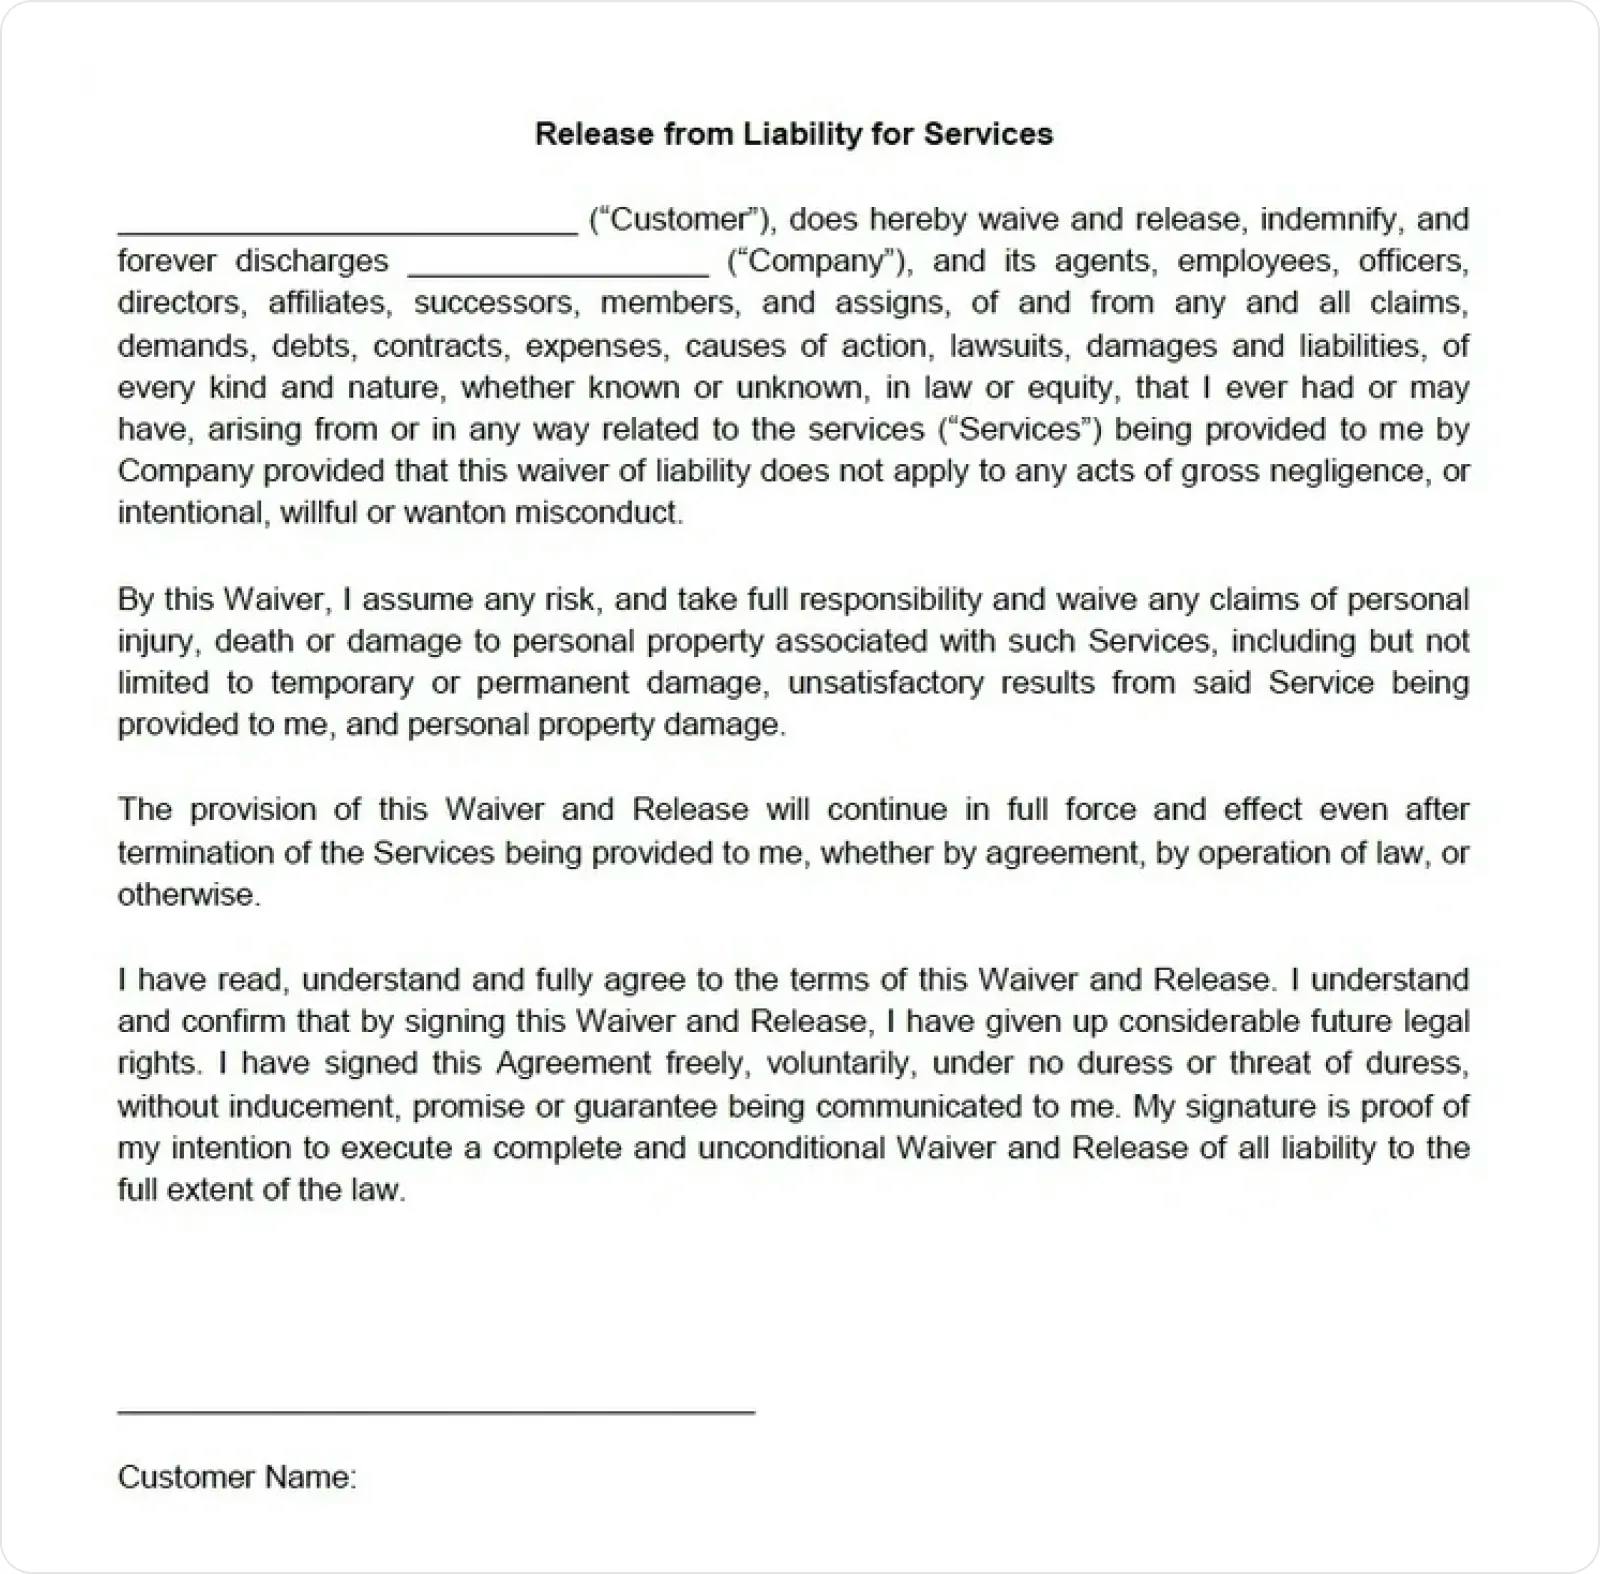 Release from Liability for Services